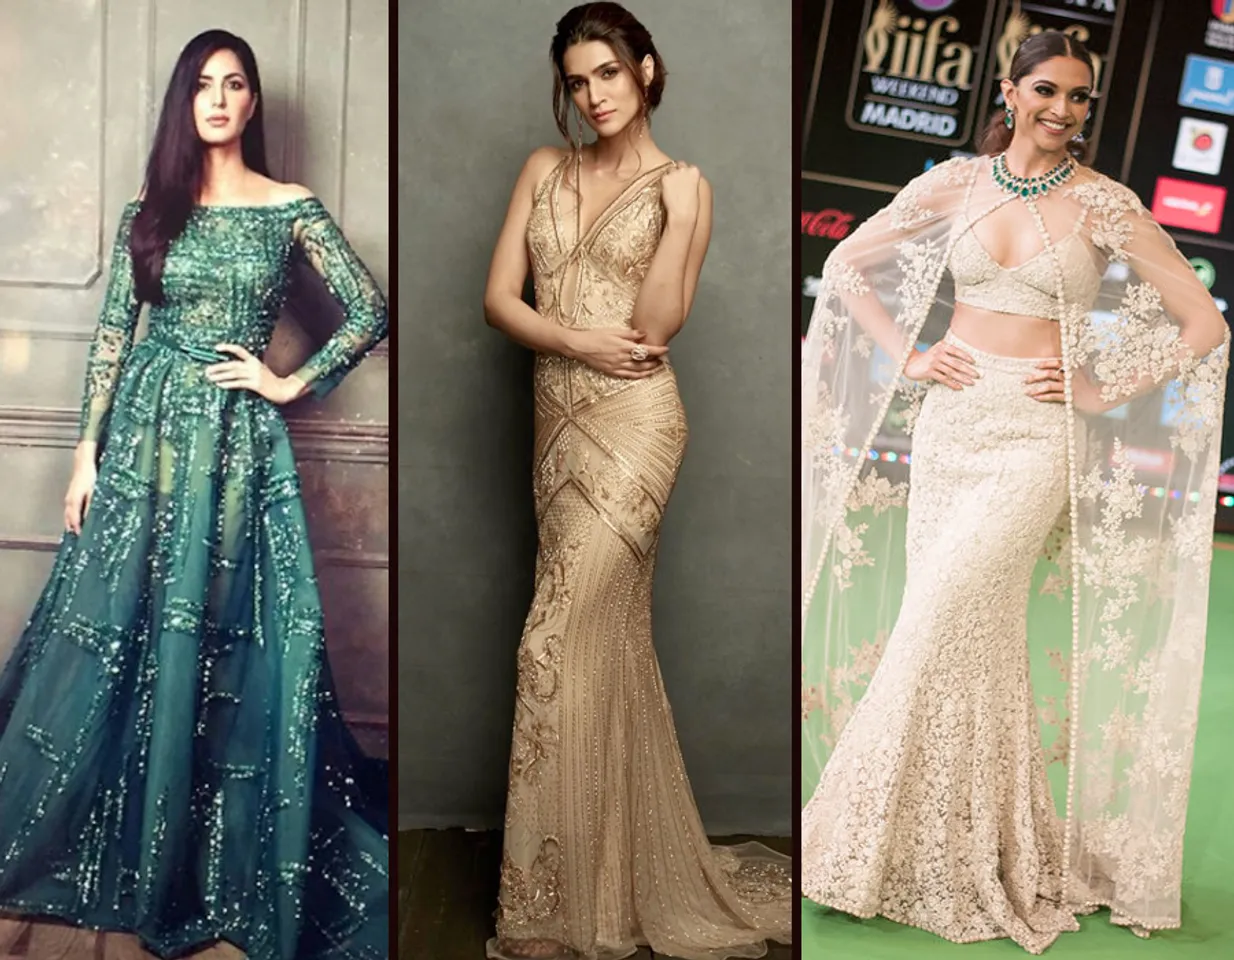 11 MOST AMAZING BOLLYWOOD RED CARPET APPEARANCES